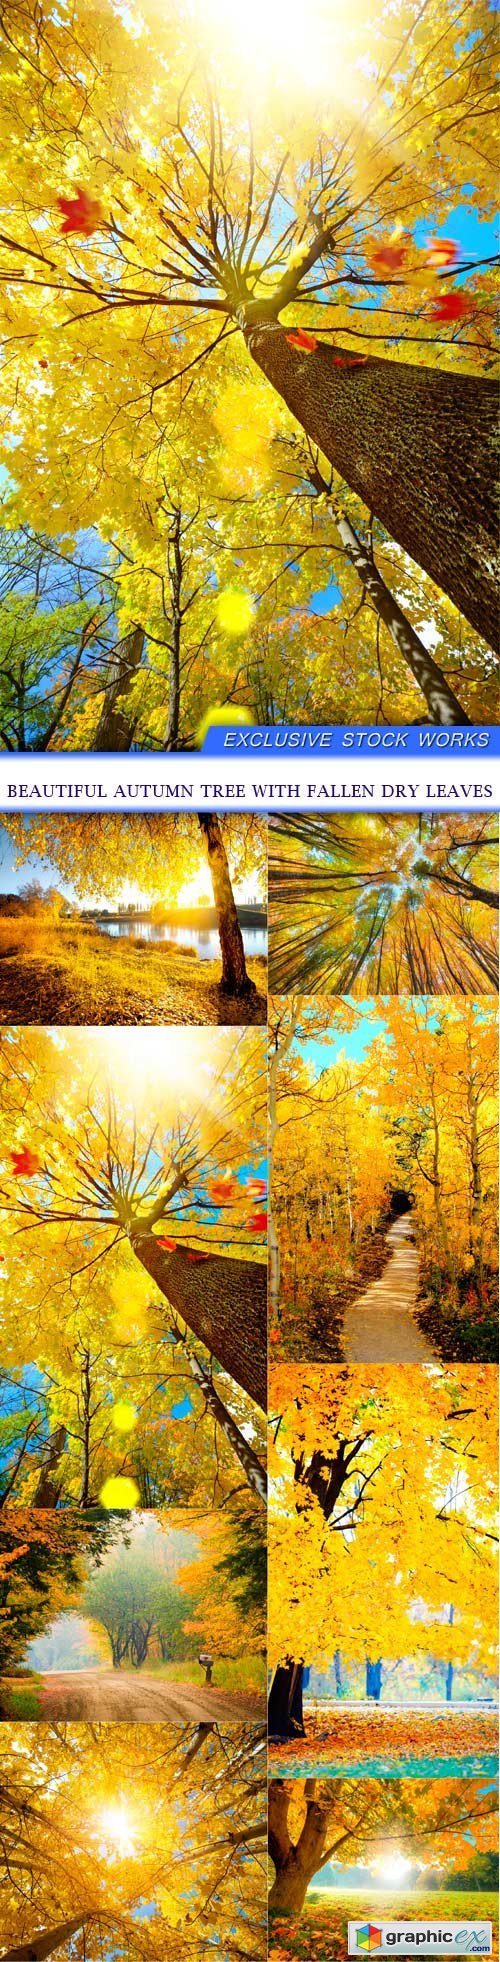 Beautiful autumn tree with fallen dry leaves 8x JPEG